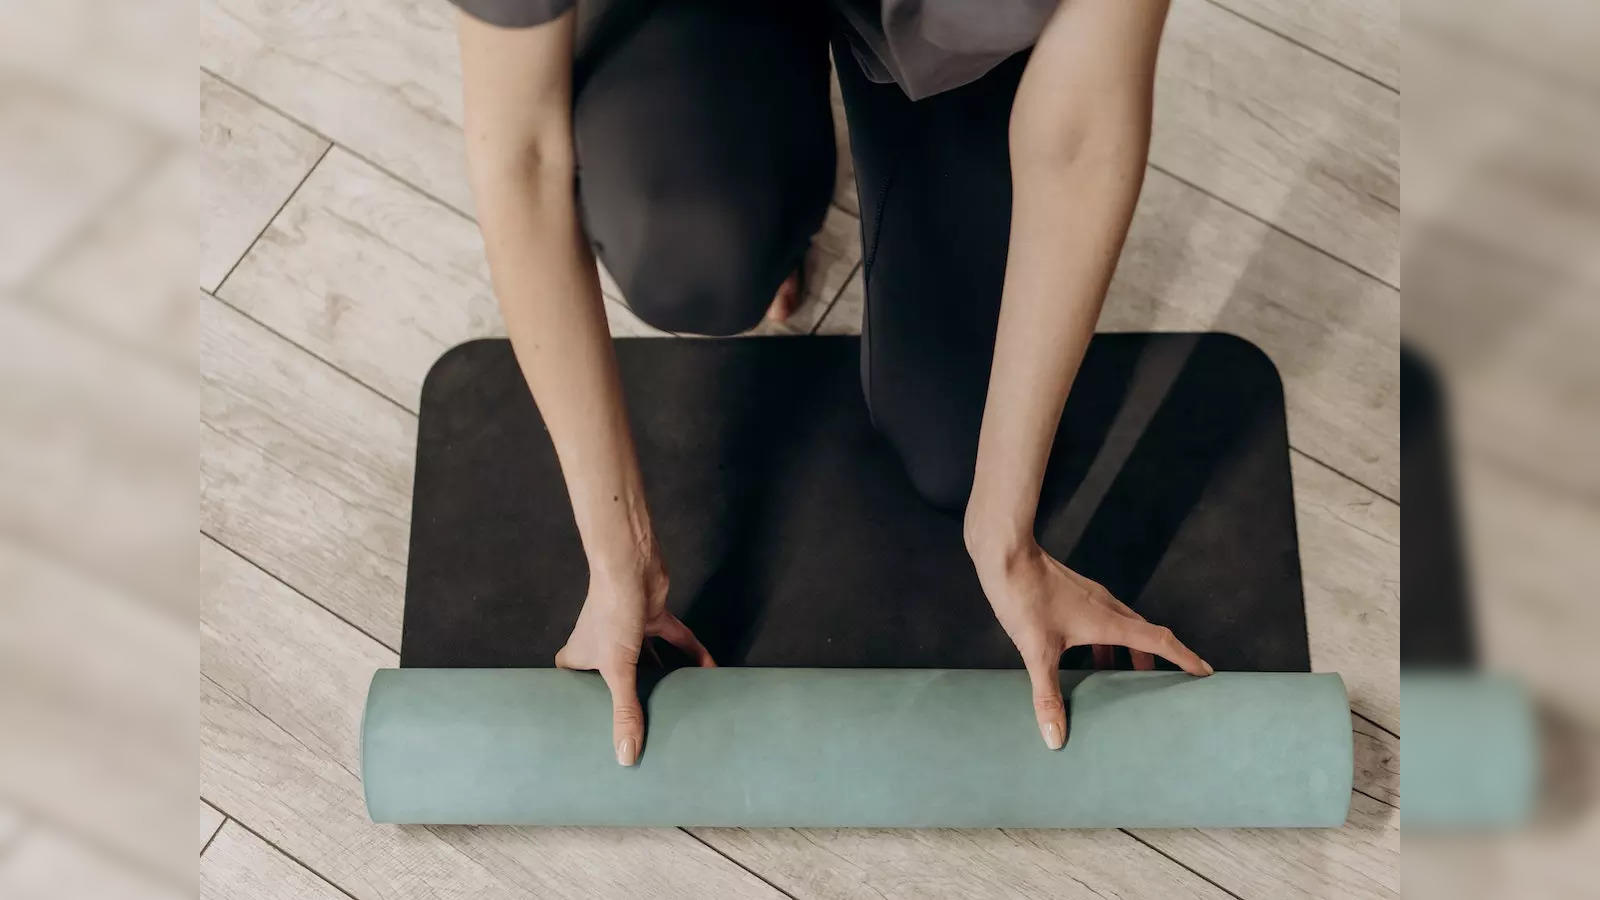 Five Important Tips to Avoid Slipping During Your Yoga Session